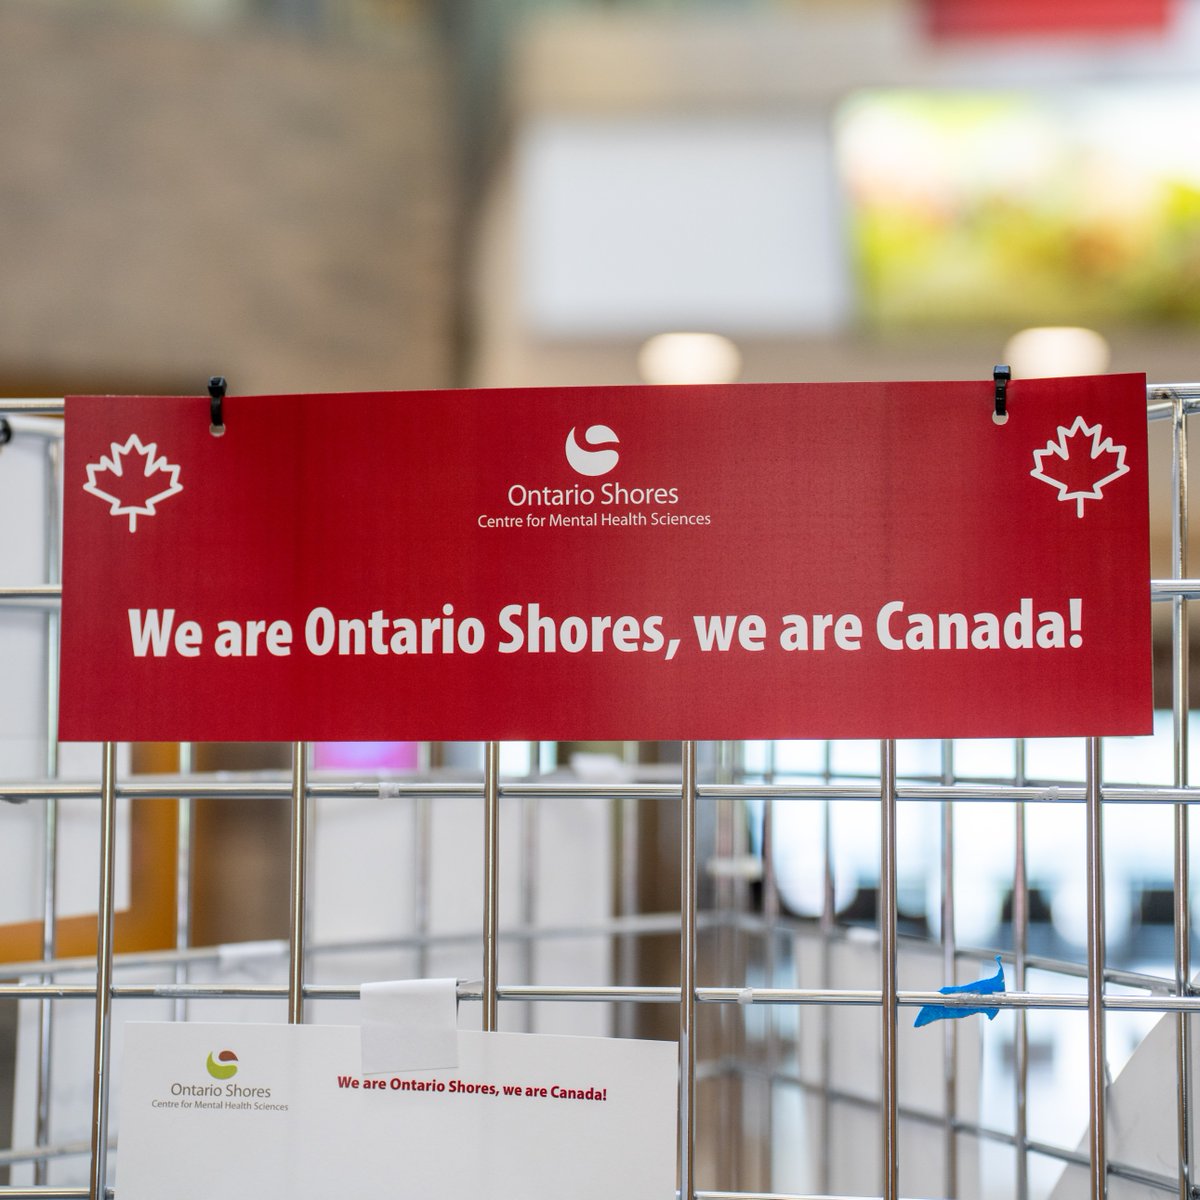 #HappyCanadaDay to our patients, staff, volunteers, community members and community partners celebrating today! Thank you to our staff who are on-site caring for our patients today. We are Ontario Shores, we are Canada!